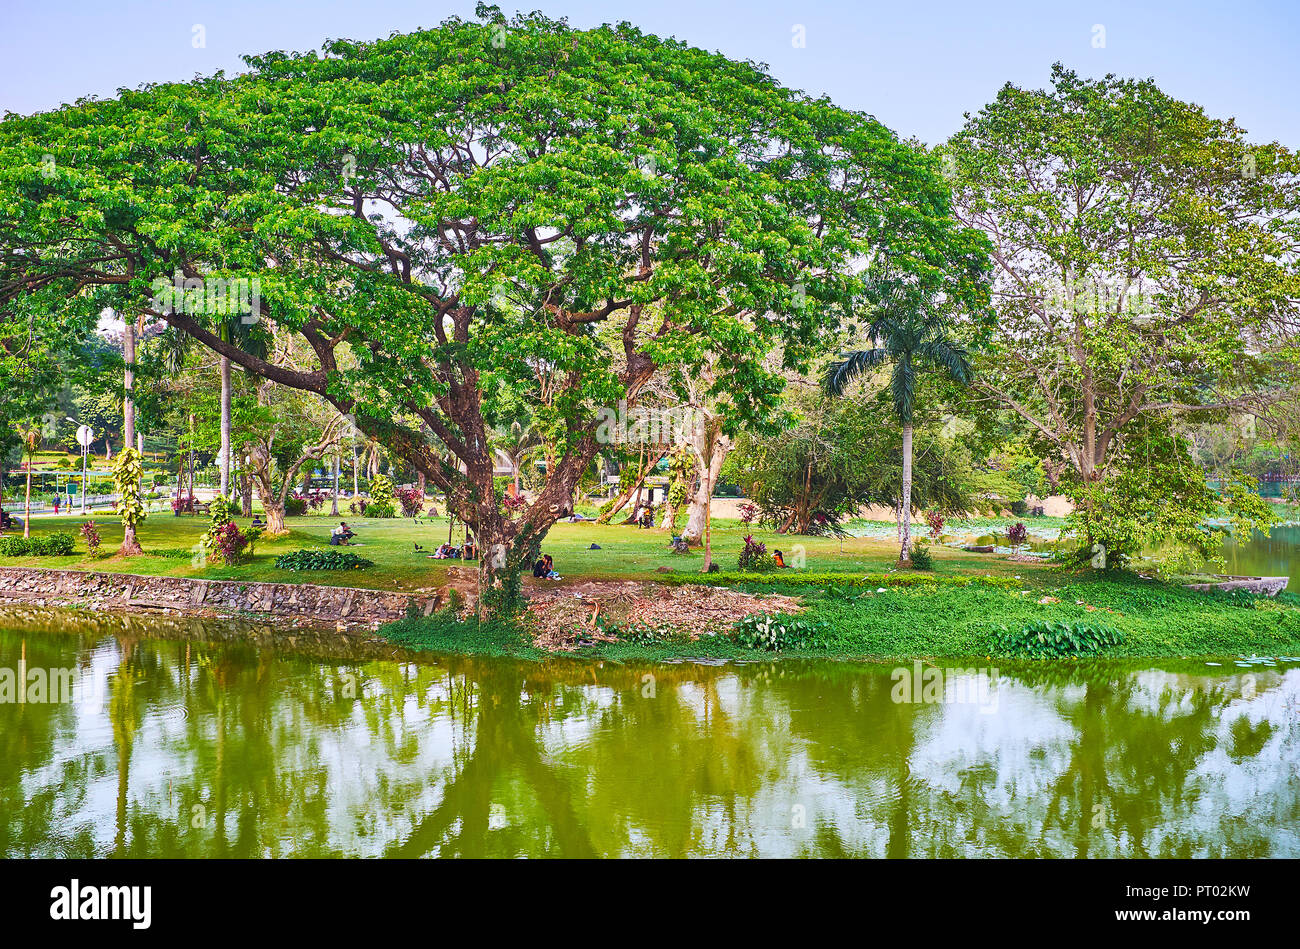 Enjoy the picnic in Kandawgyi Nature Park by the lake with a view on spreading acacia leucophloea (htanaung) tree, Bahan township, Yangon, Myanmar. Stock Photo